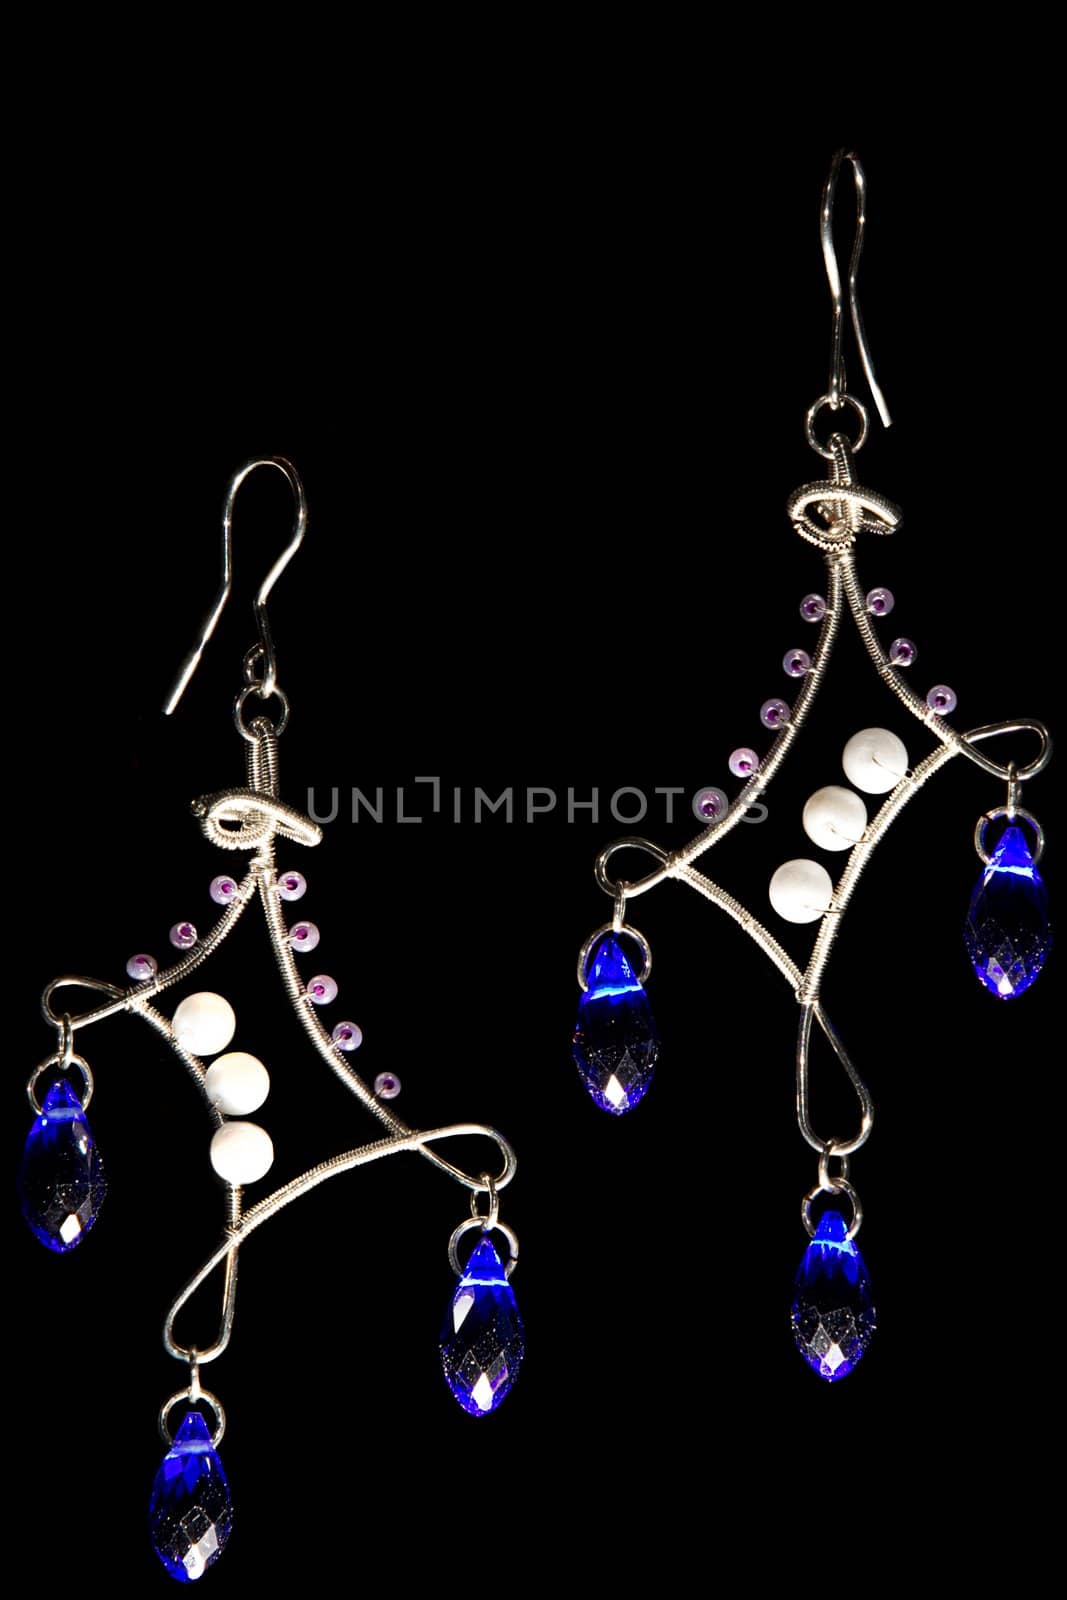 Unique handmade wire-work earrings with blue drops and violet beads